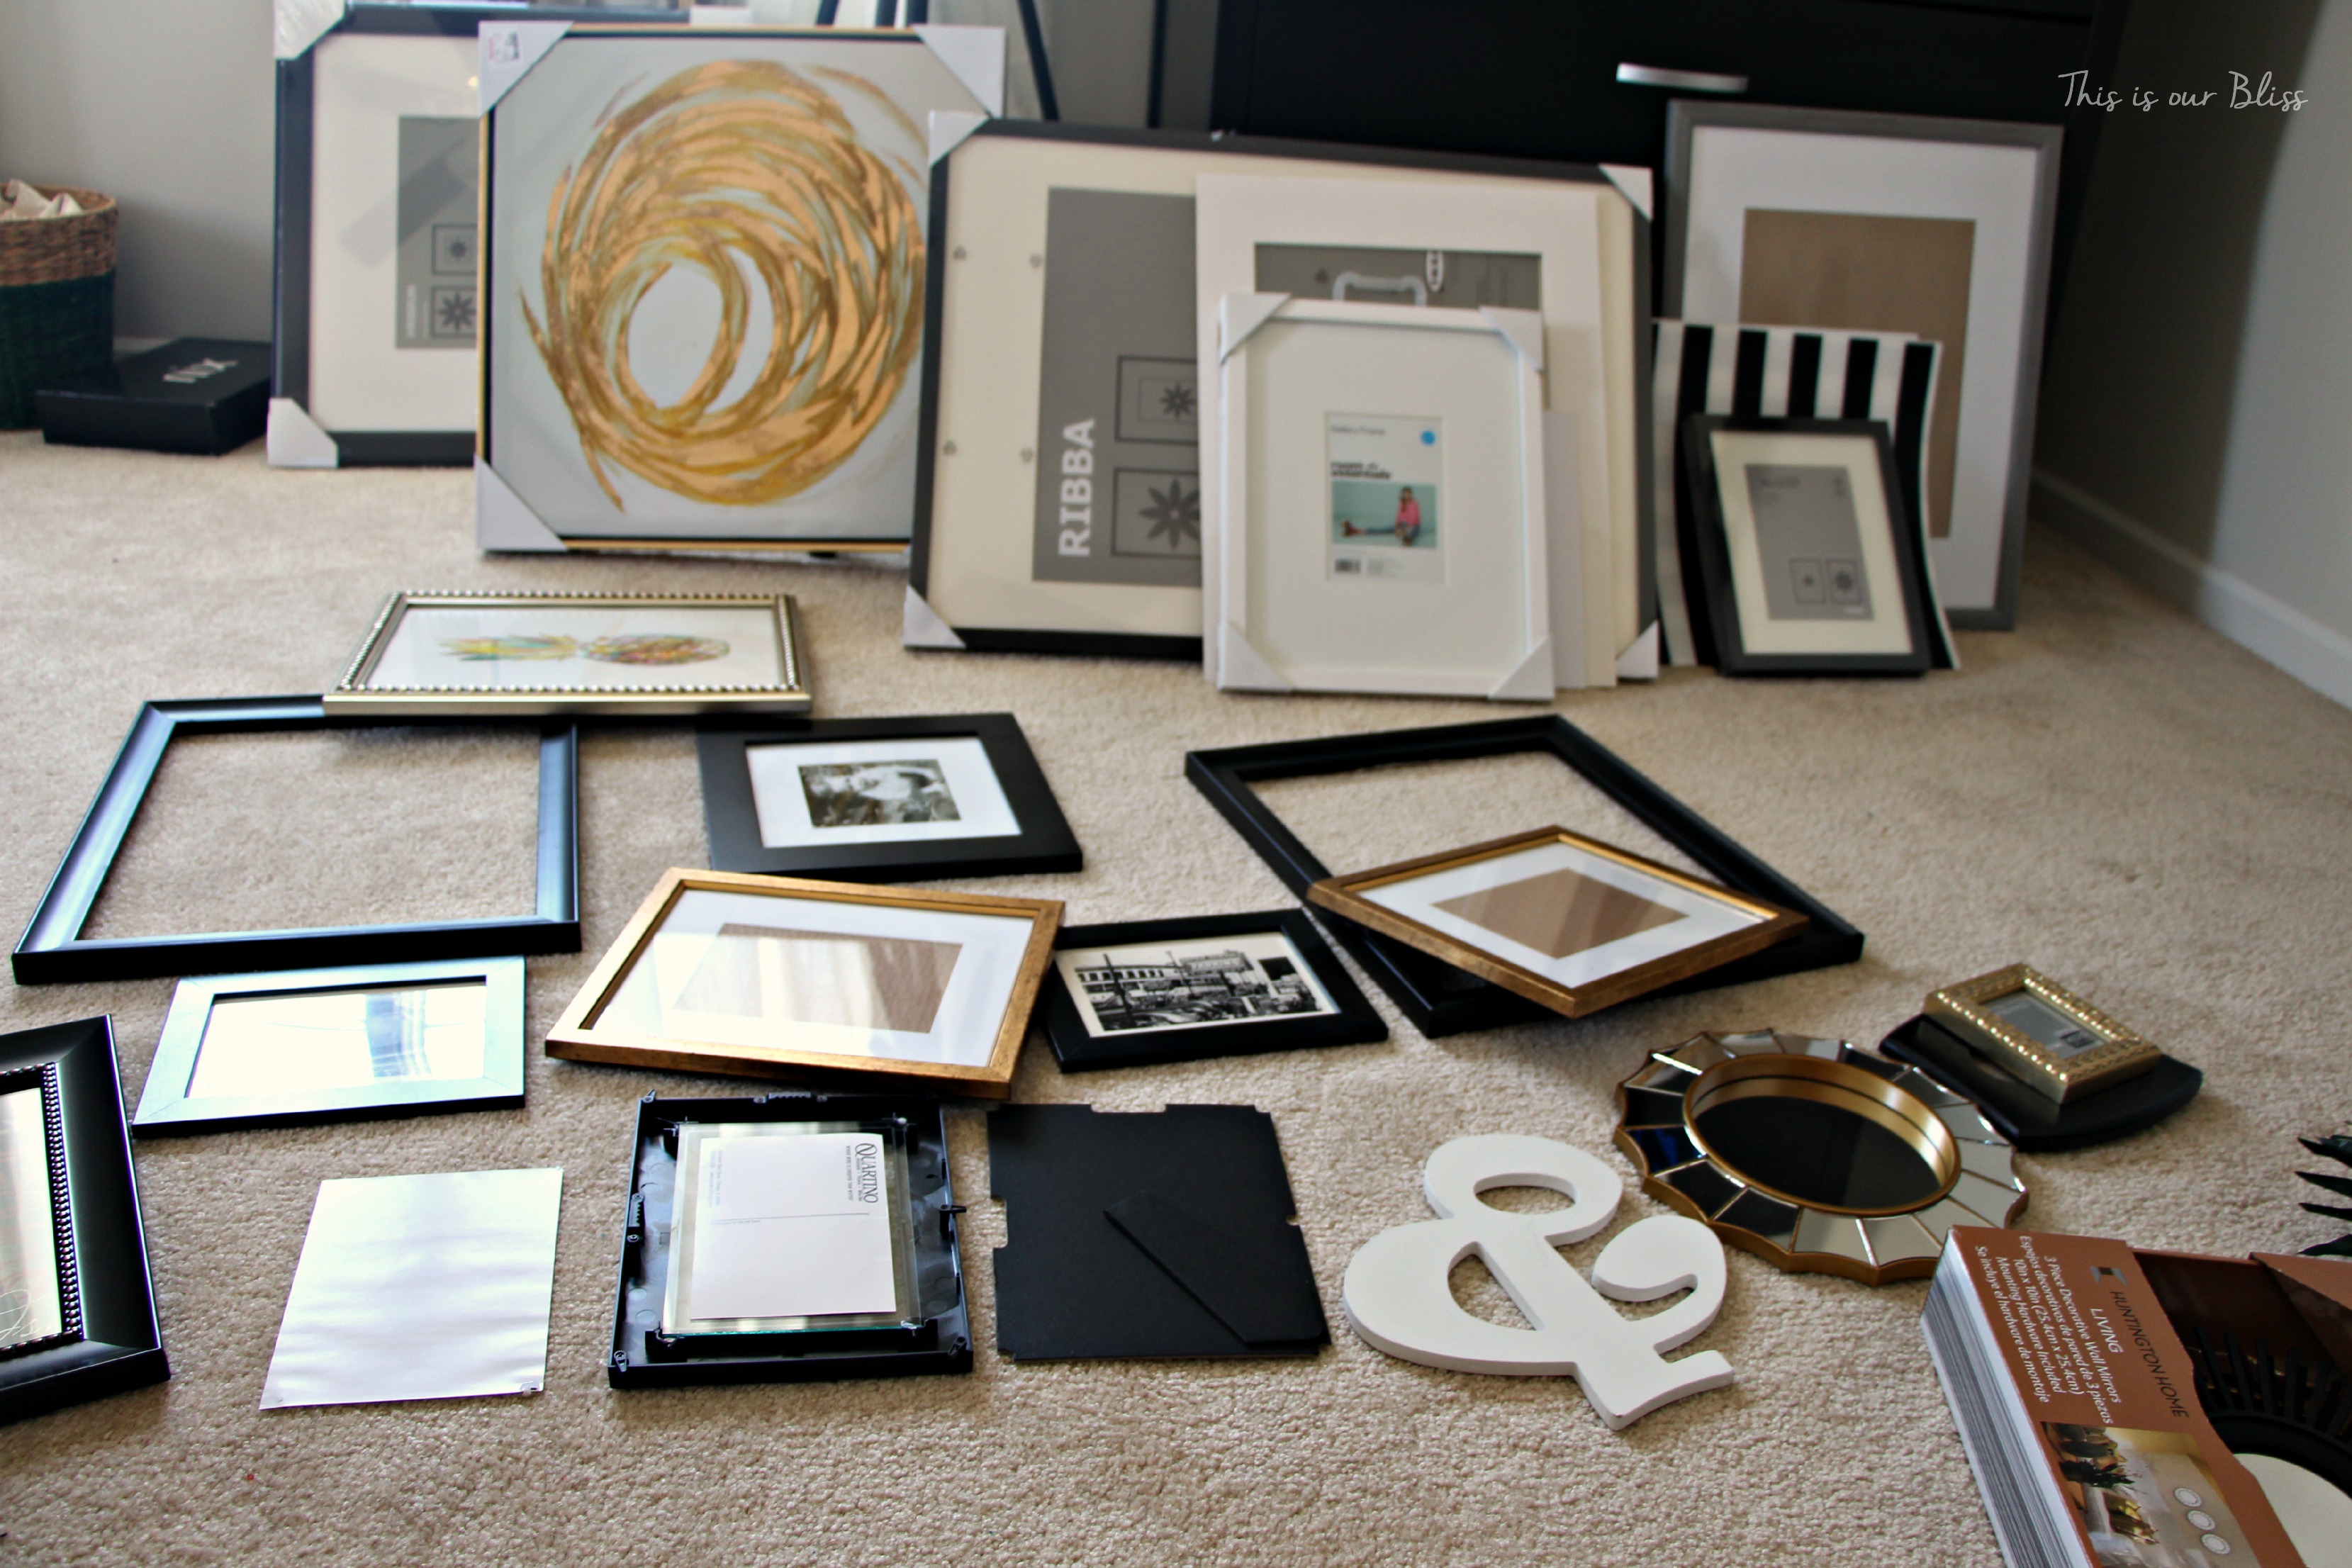 gallery wall planning - guestroom revamp - This is our Bliss